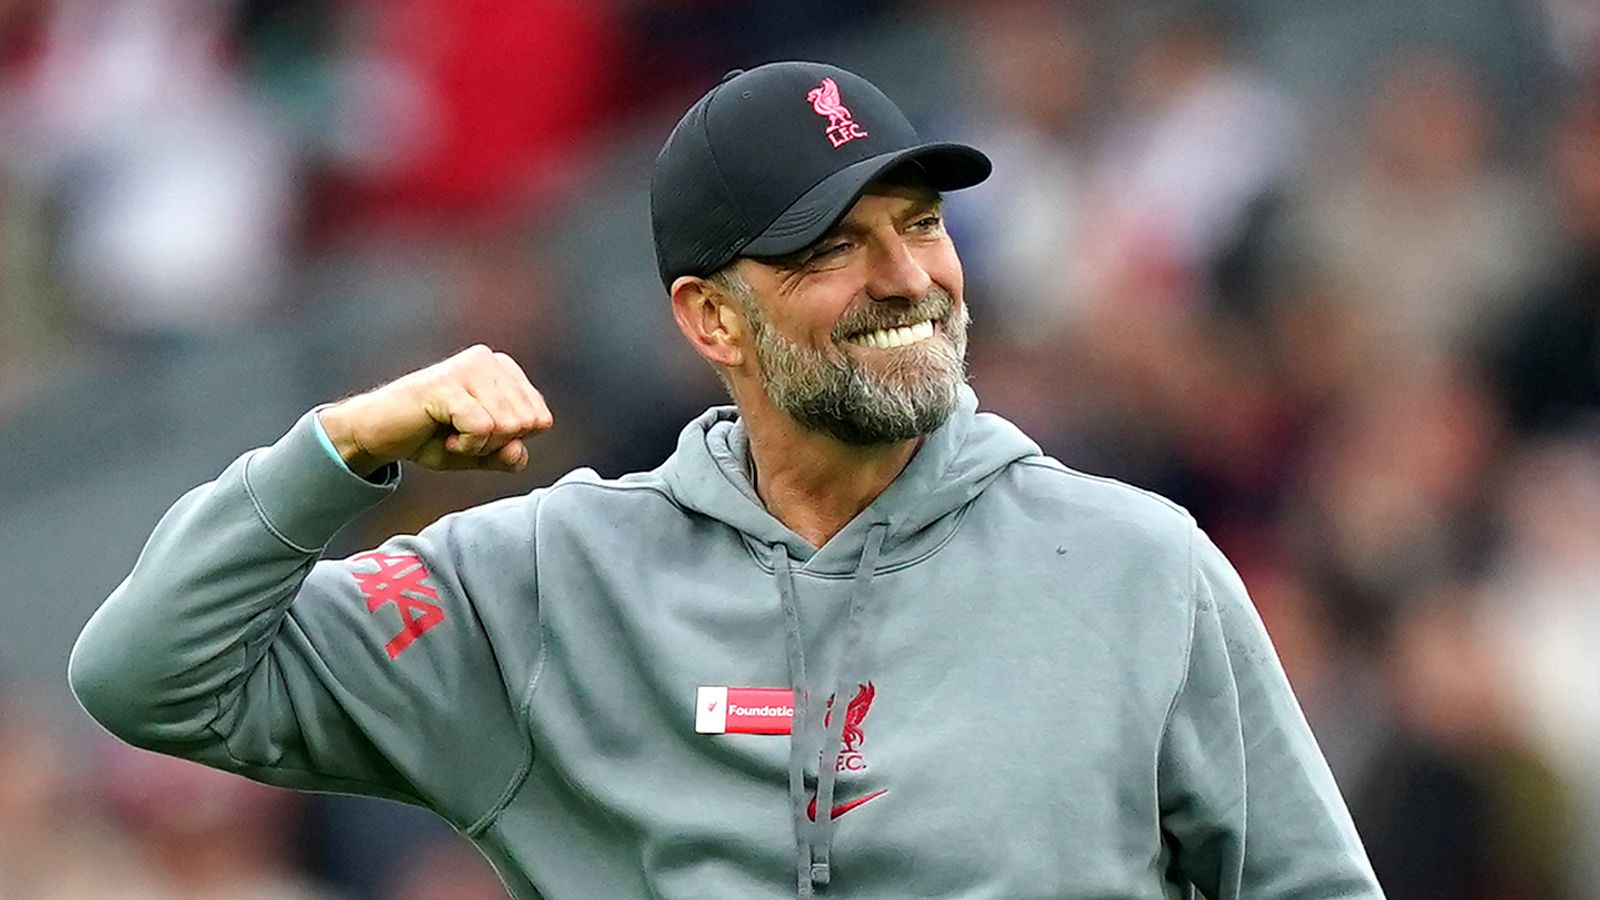 Jurgen Klopp: Liverpool an attractive club for transfers even without Champions League football | Football News | Sky Sports